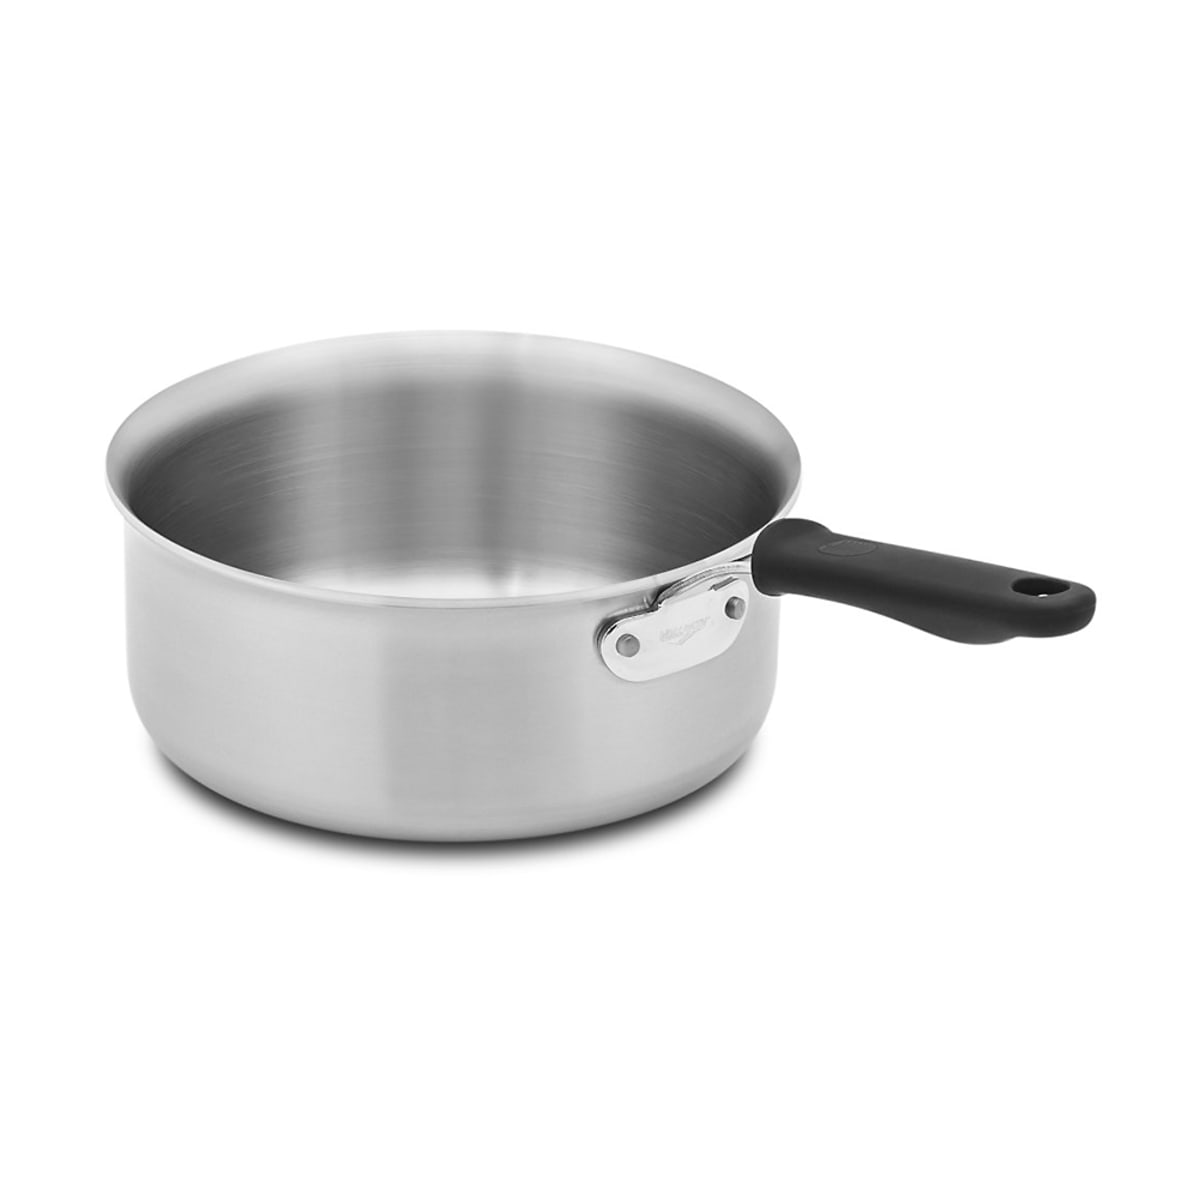 3.5 QT COMMERCIAL STAINLESS STEEL SAUCE PAN - NSF